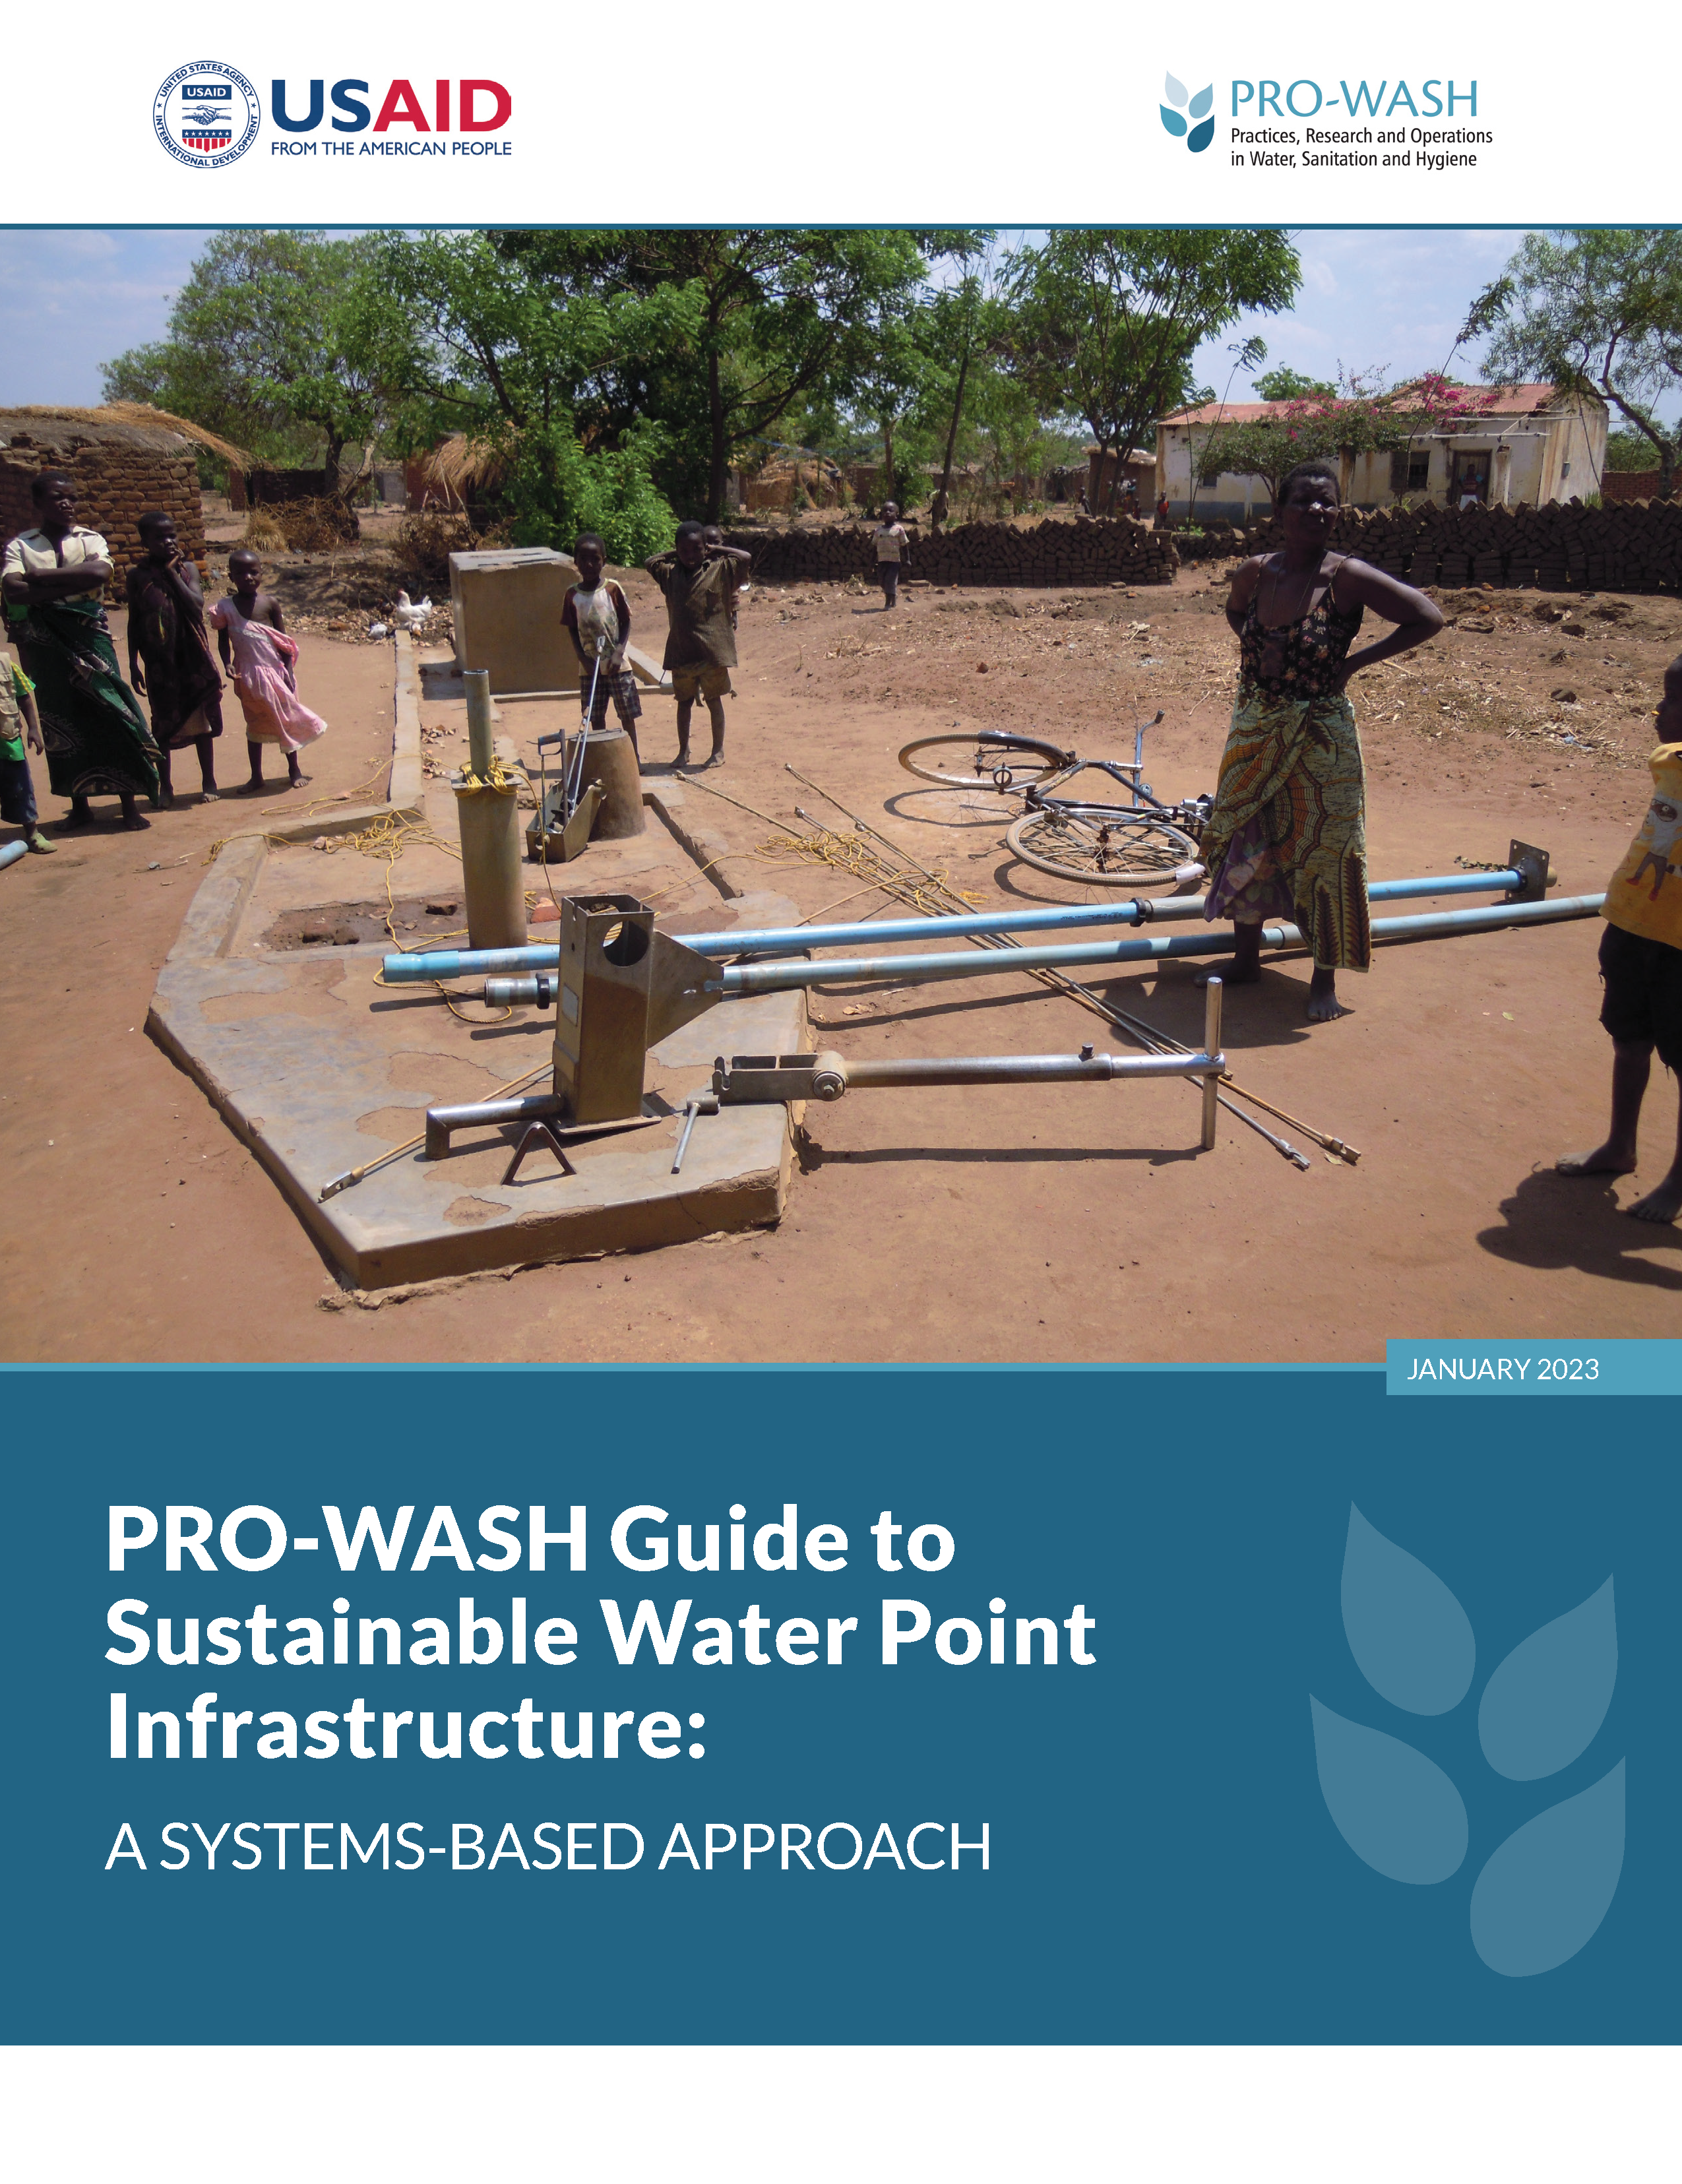 Cover page for PRO-WASH Guide to Sustainable Water Point Infrastructure: A Systems-Based Approach